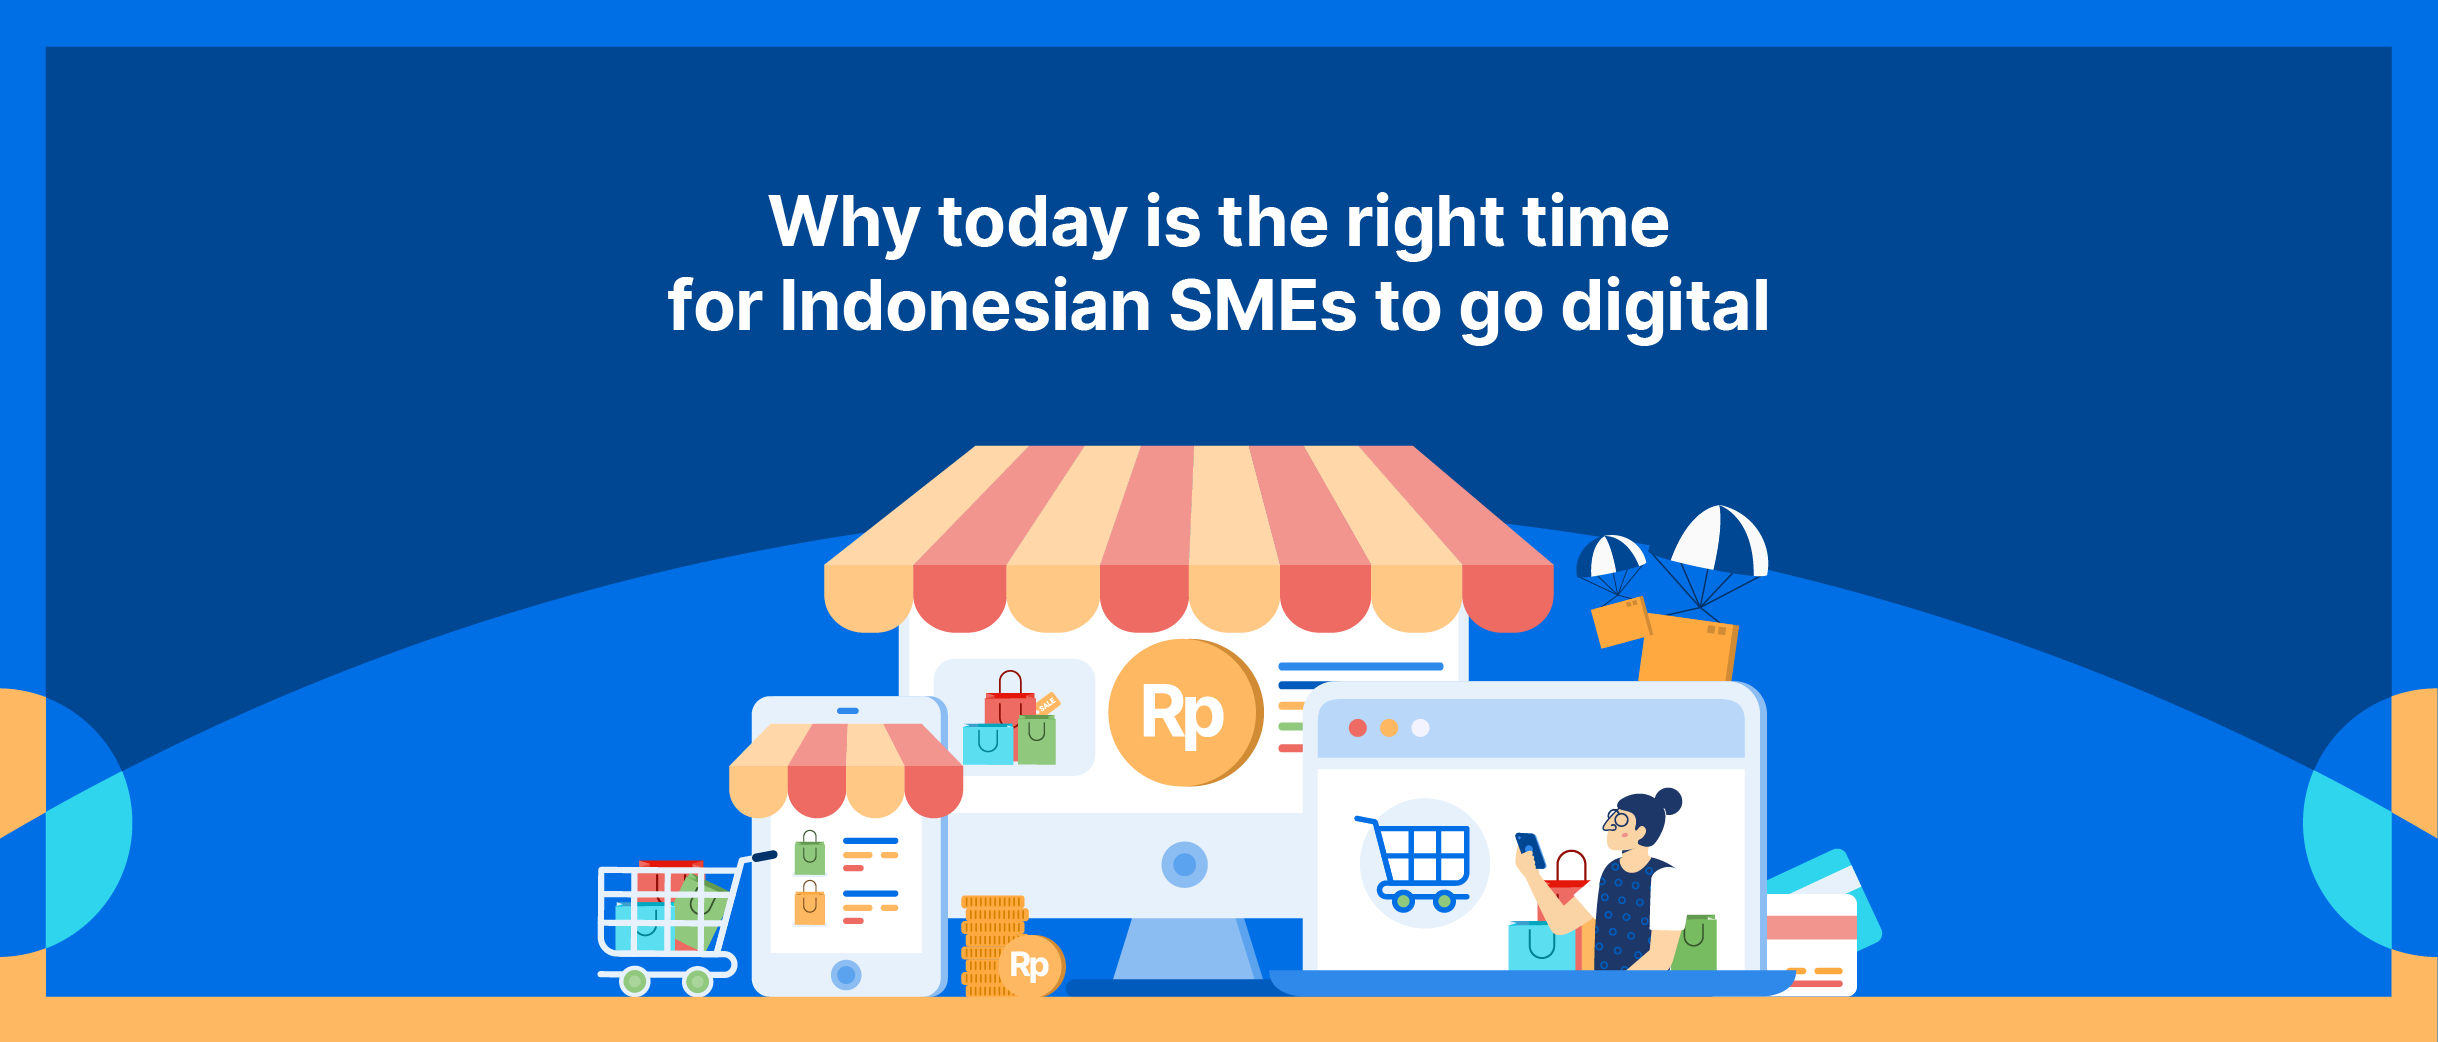 Why Today is the Right Time for Indonesian SMEs to Go Digital